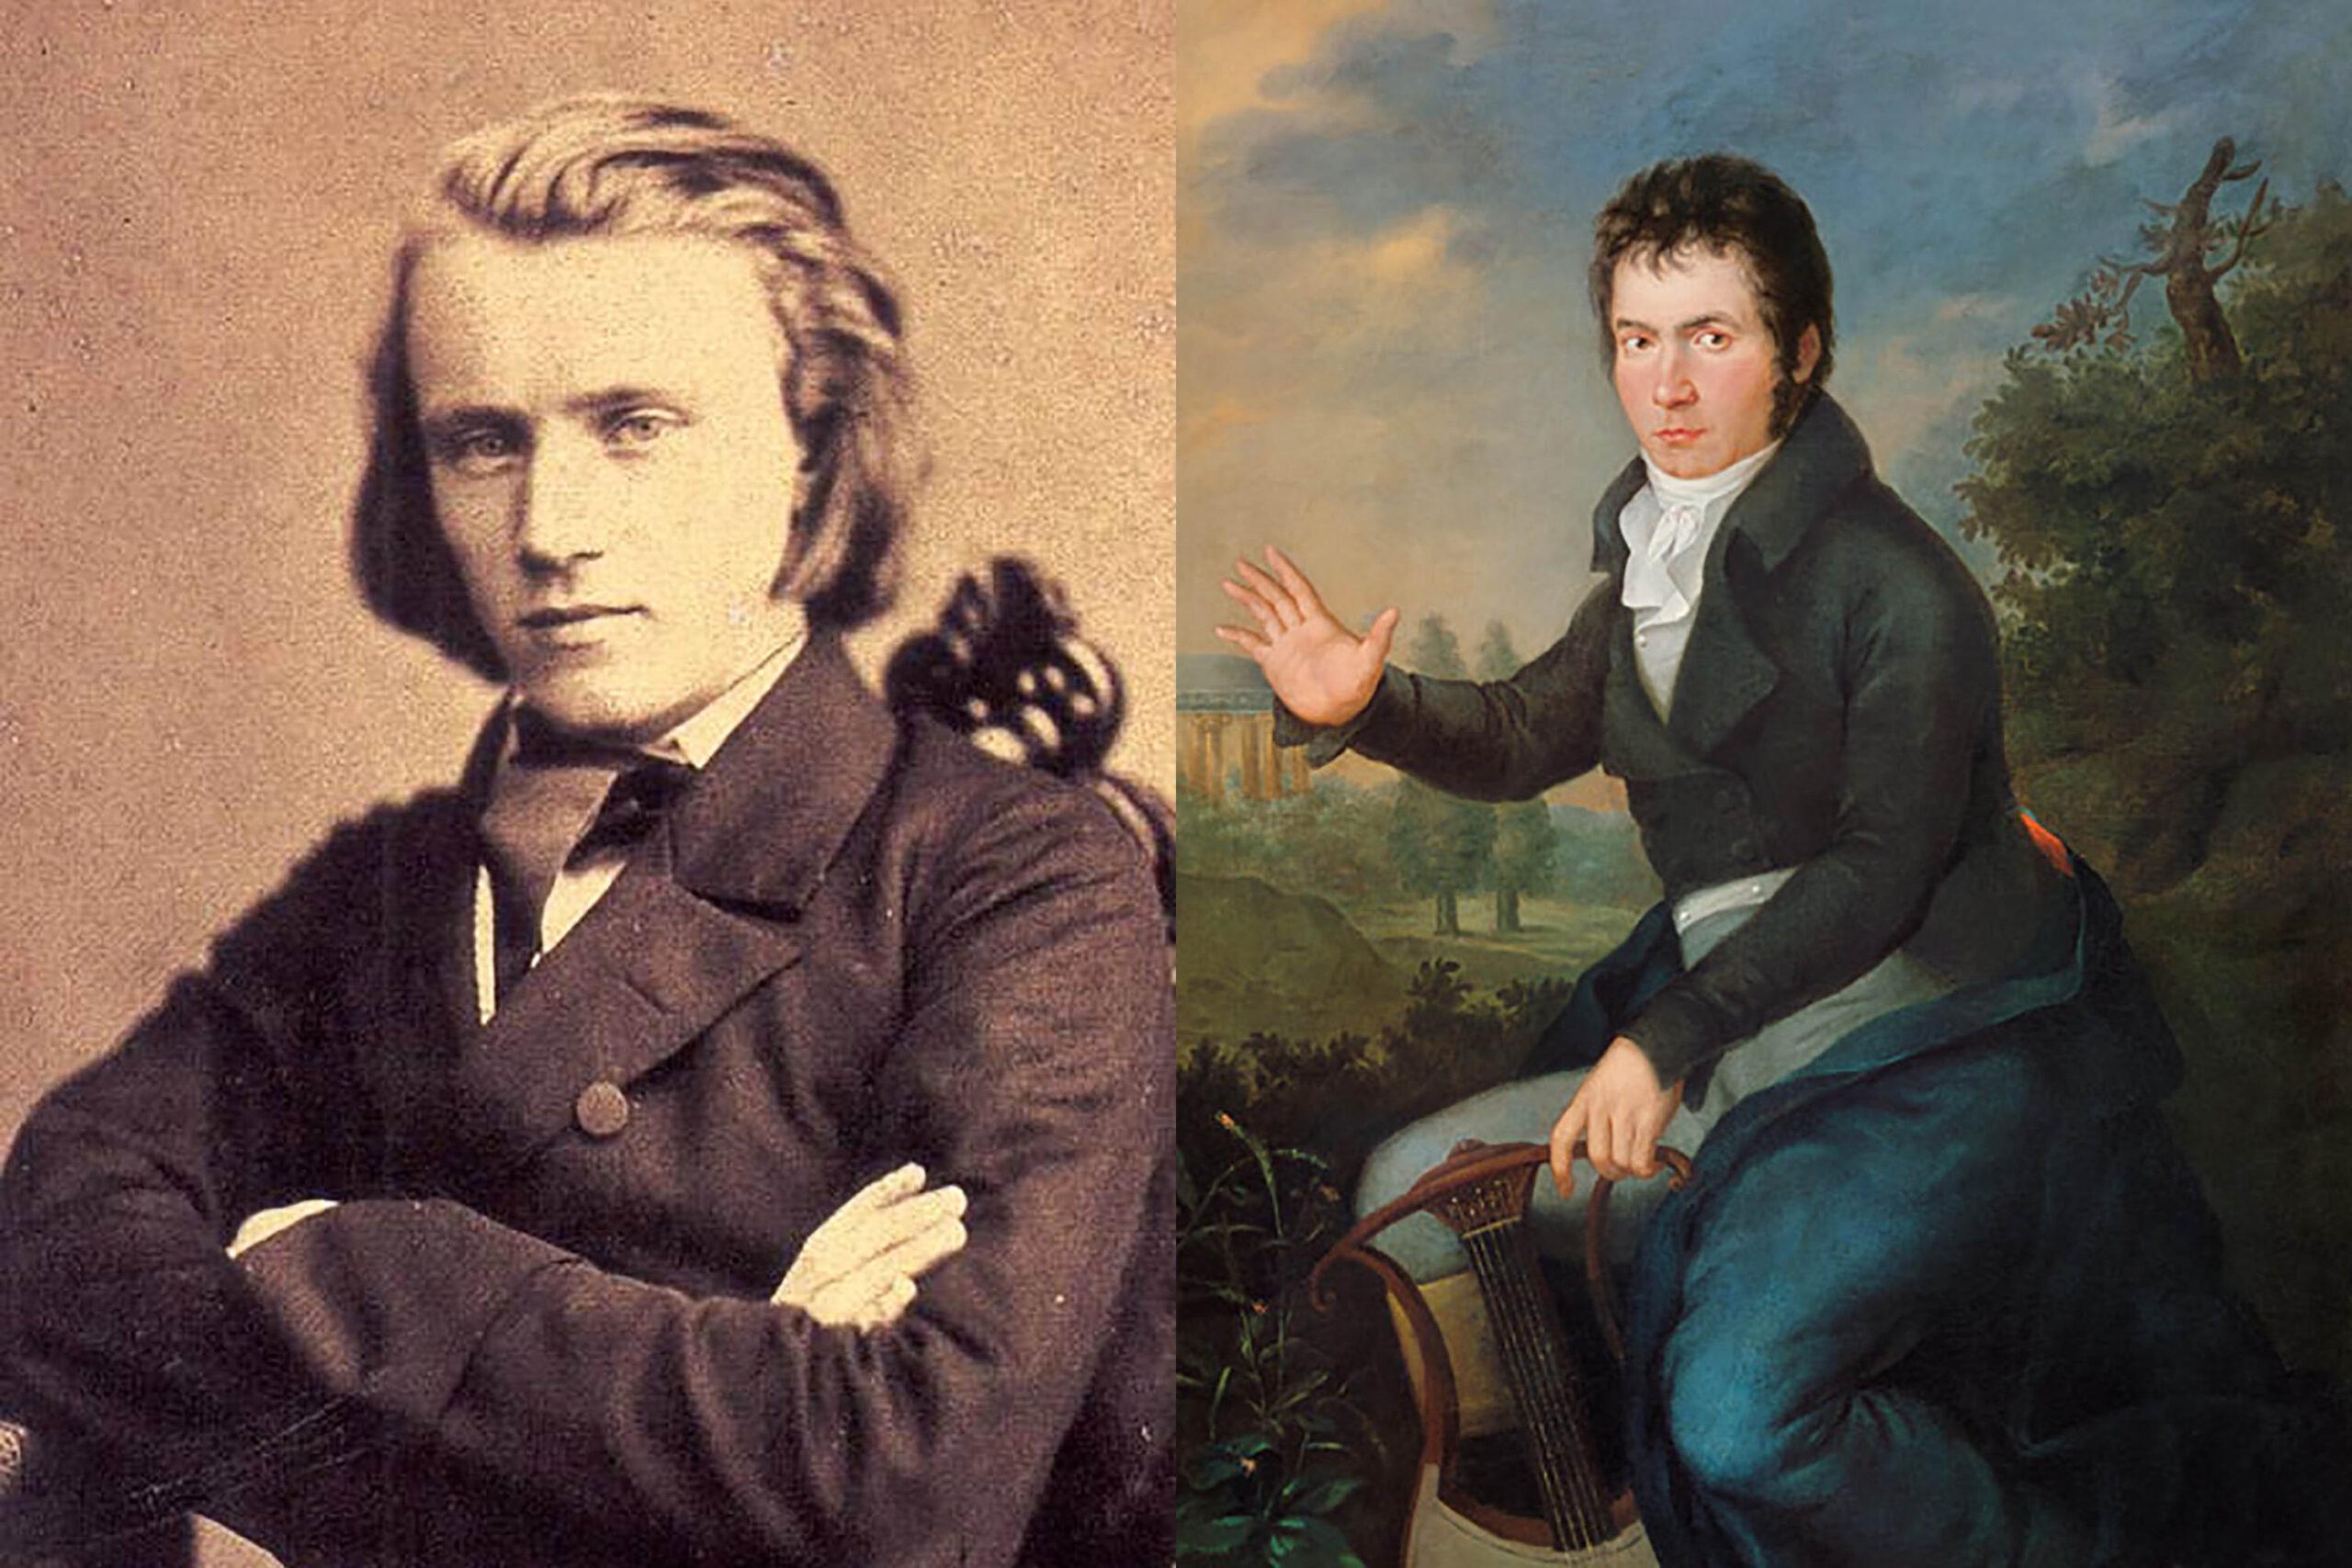 Brahms and Beethoven